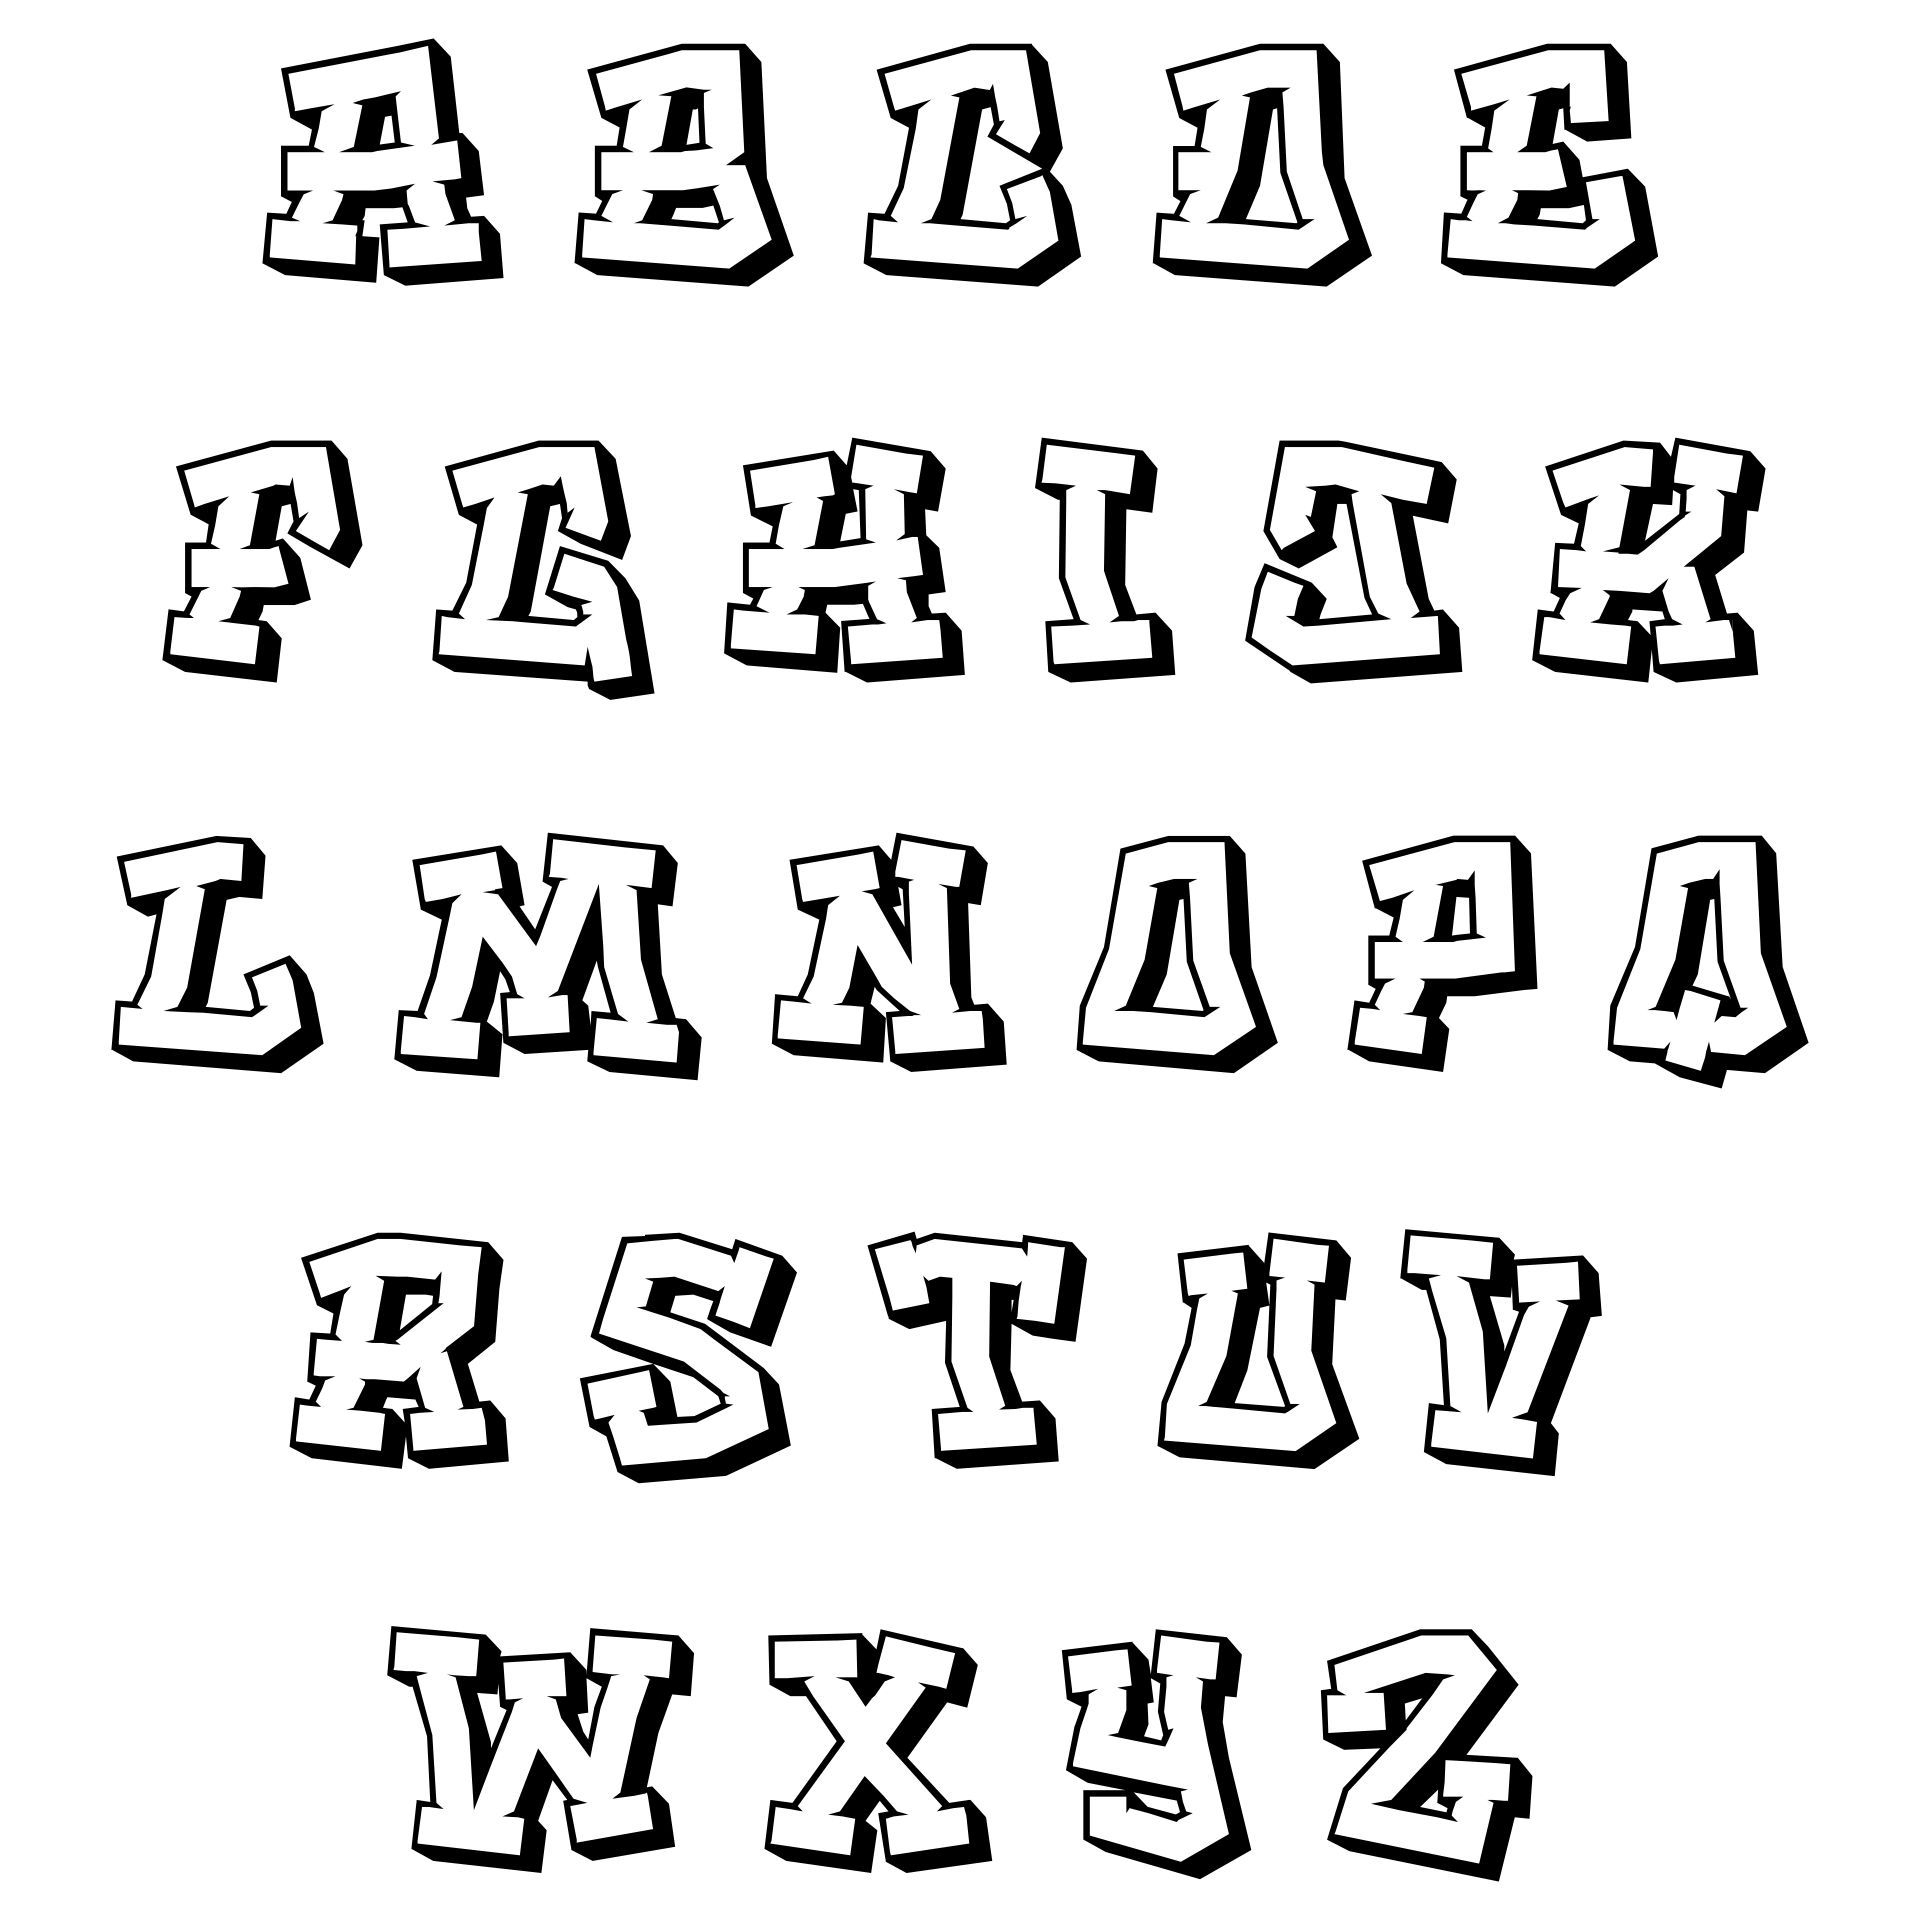 Font Styles Alphabet - 20 Free Pdf Printables | Printablee - Printable Letters In Different Fonts